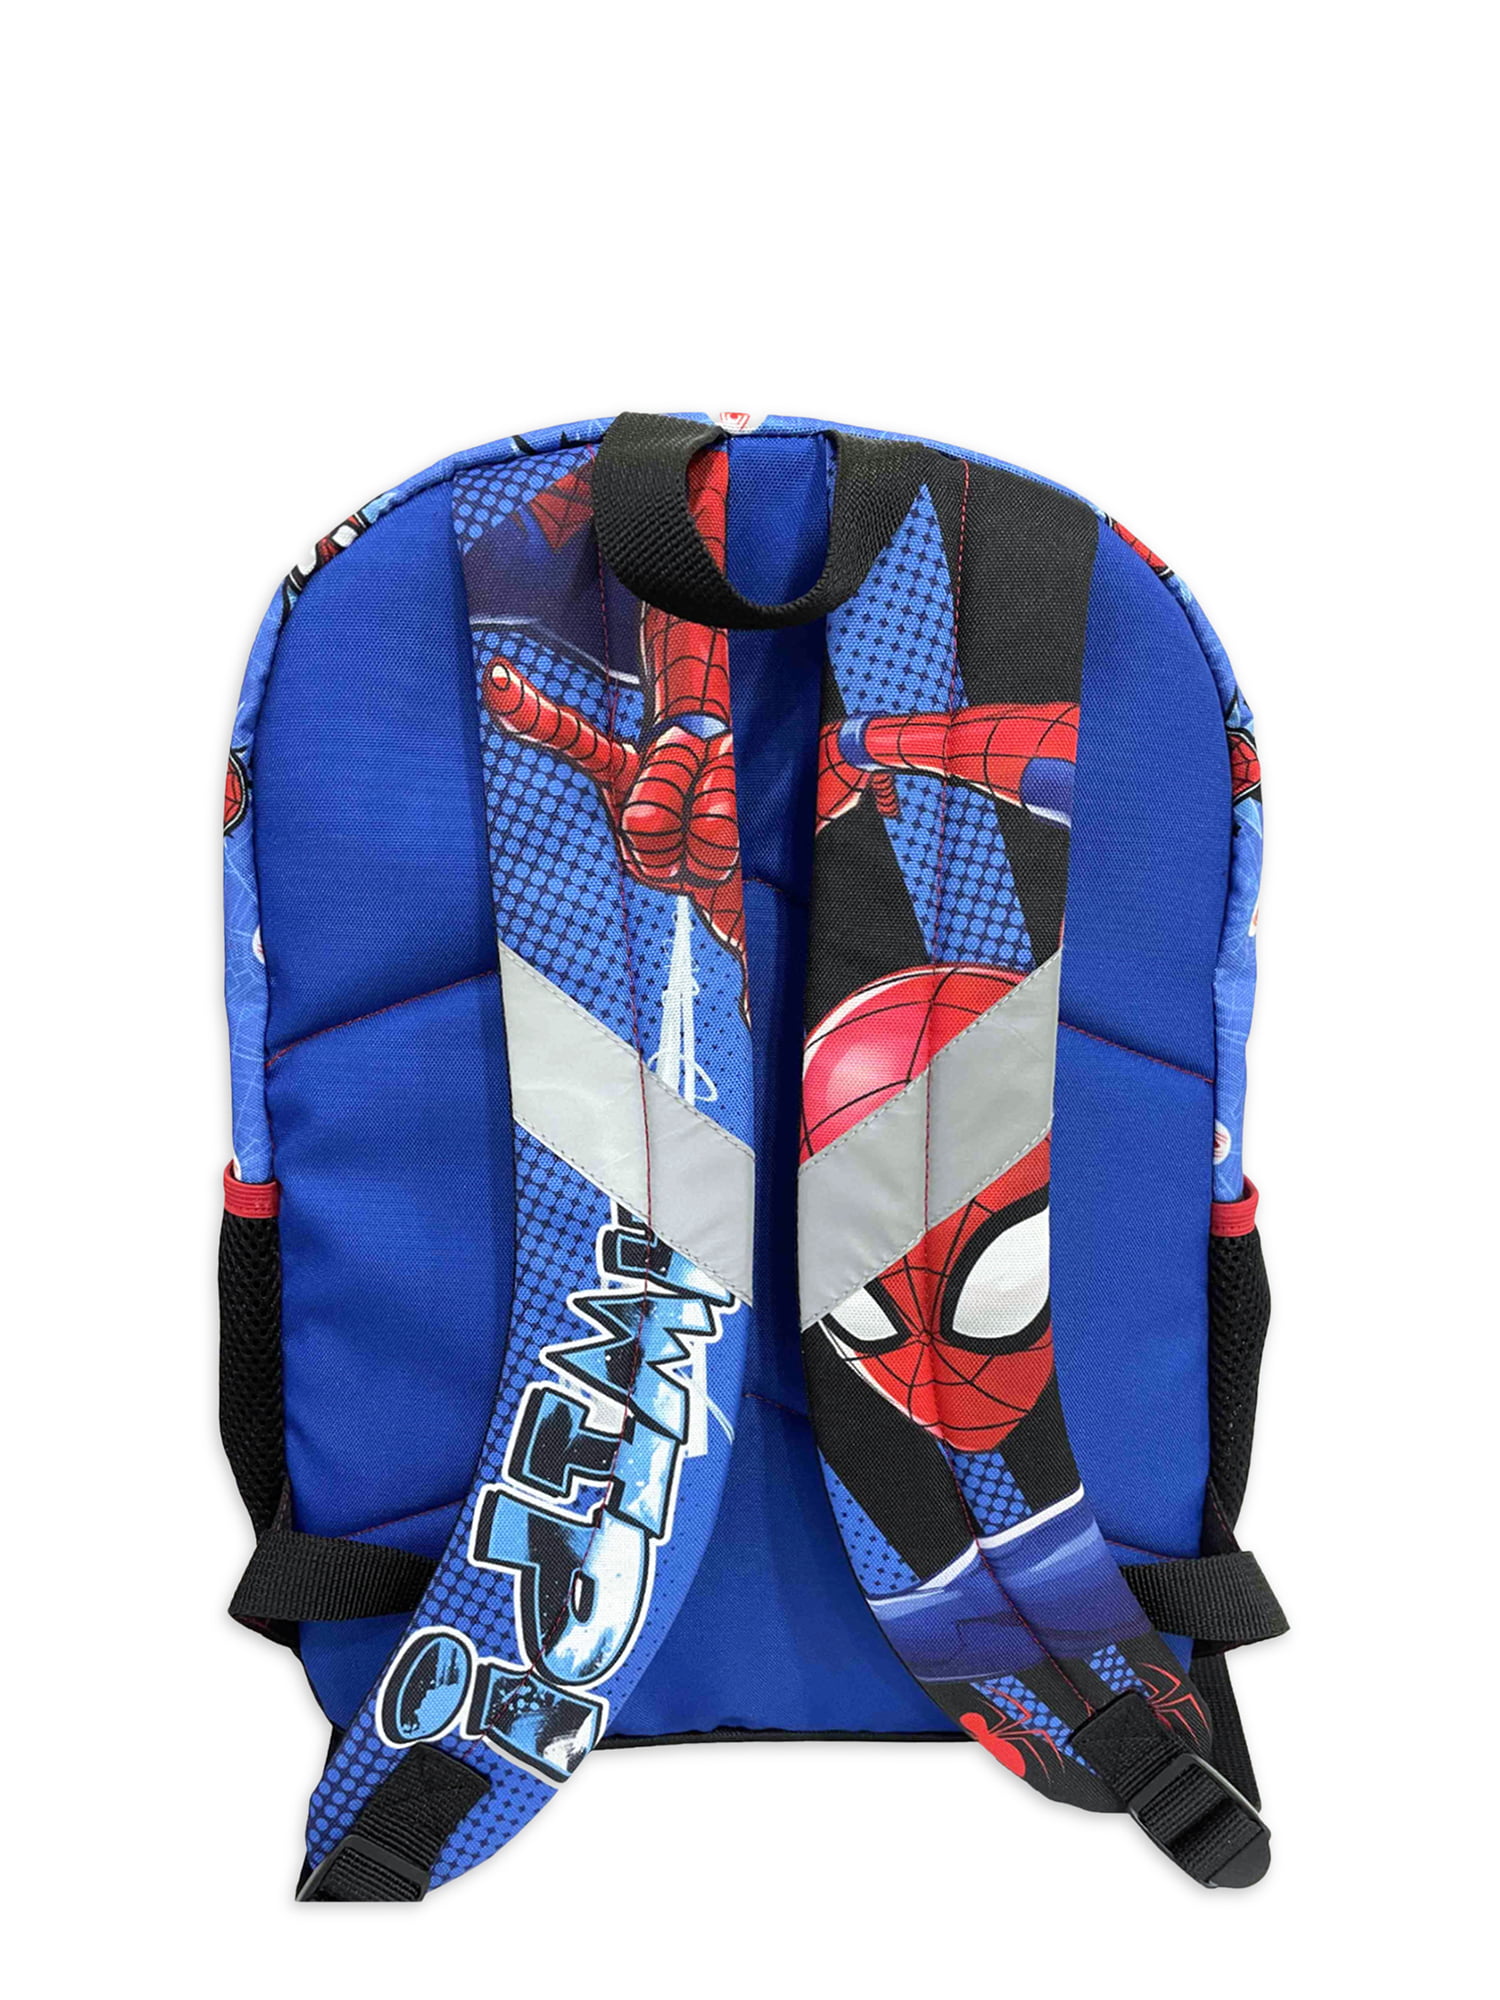 Marvel Spider-Man Across The Spider-Verse Boys 17 Laptop Backpack 2-Piece Set with Lunch Black Blue